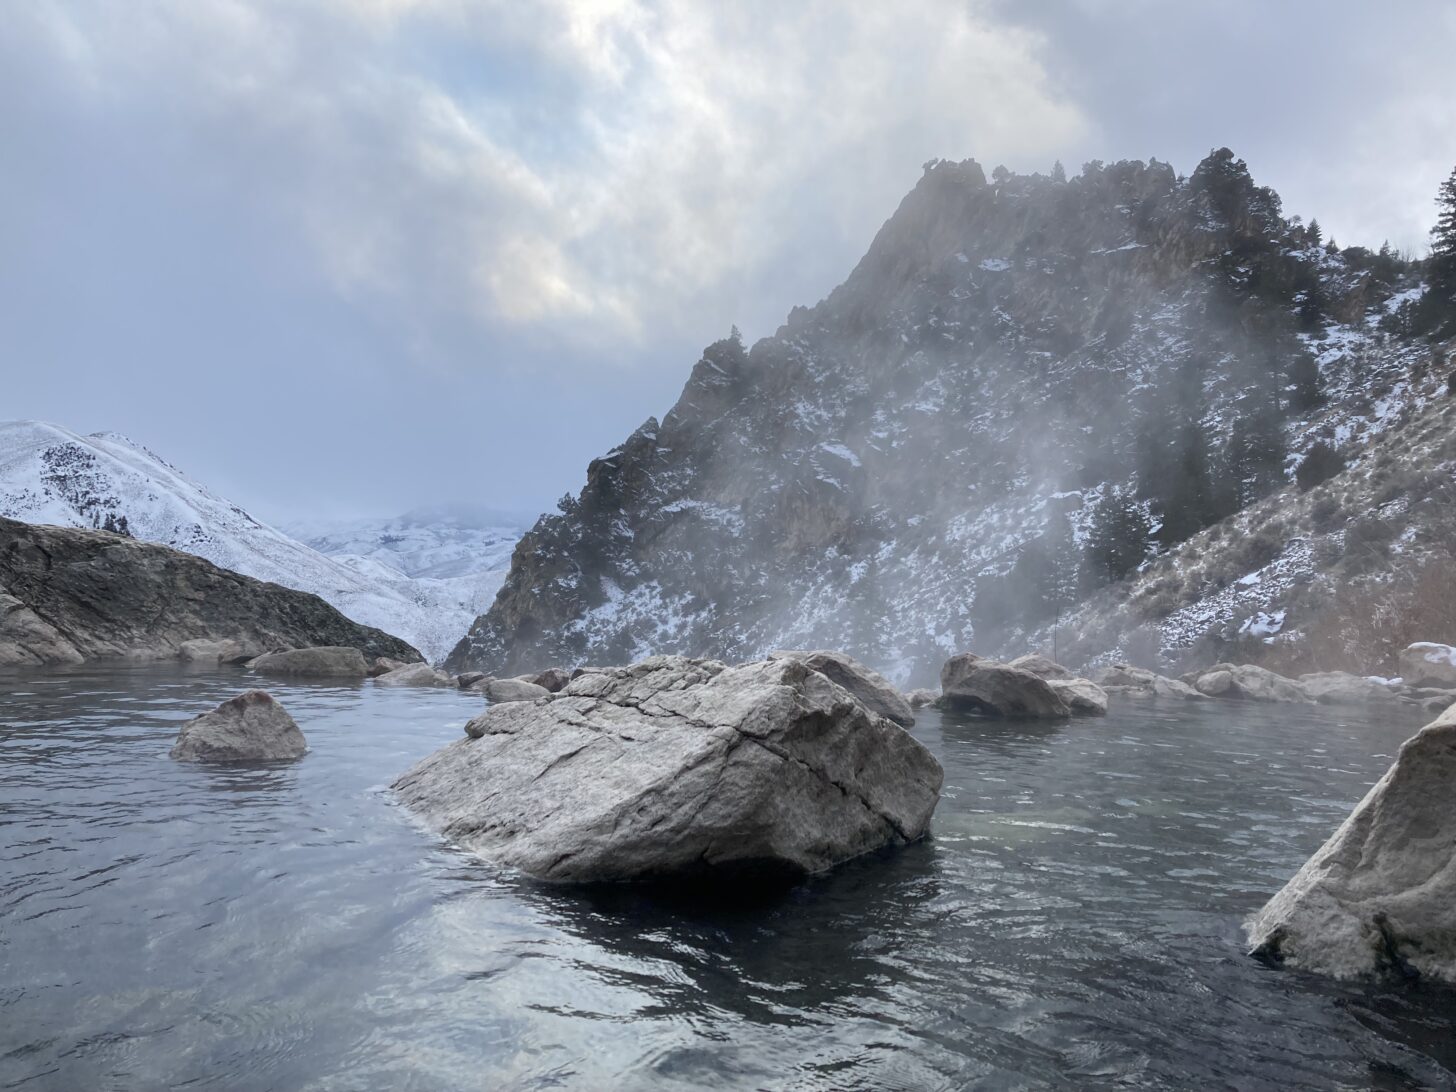 A hot springs in winter with a mountain in the background.